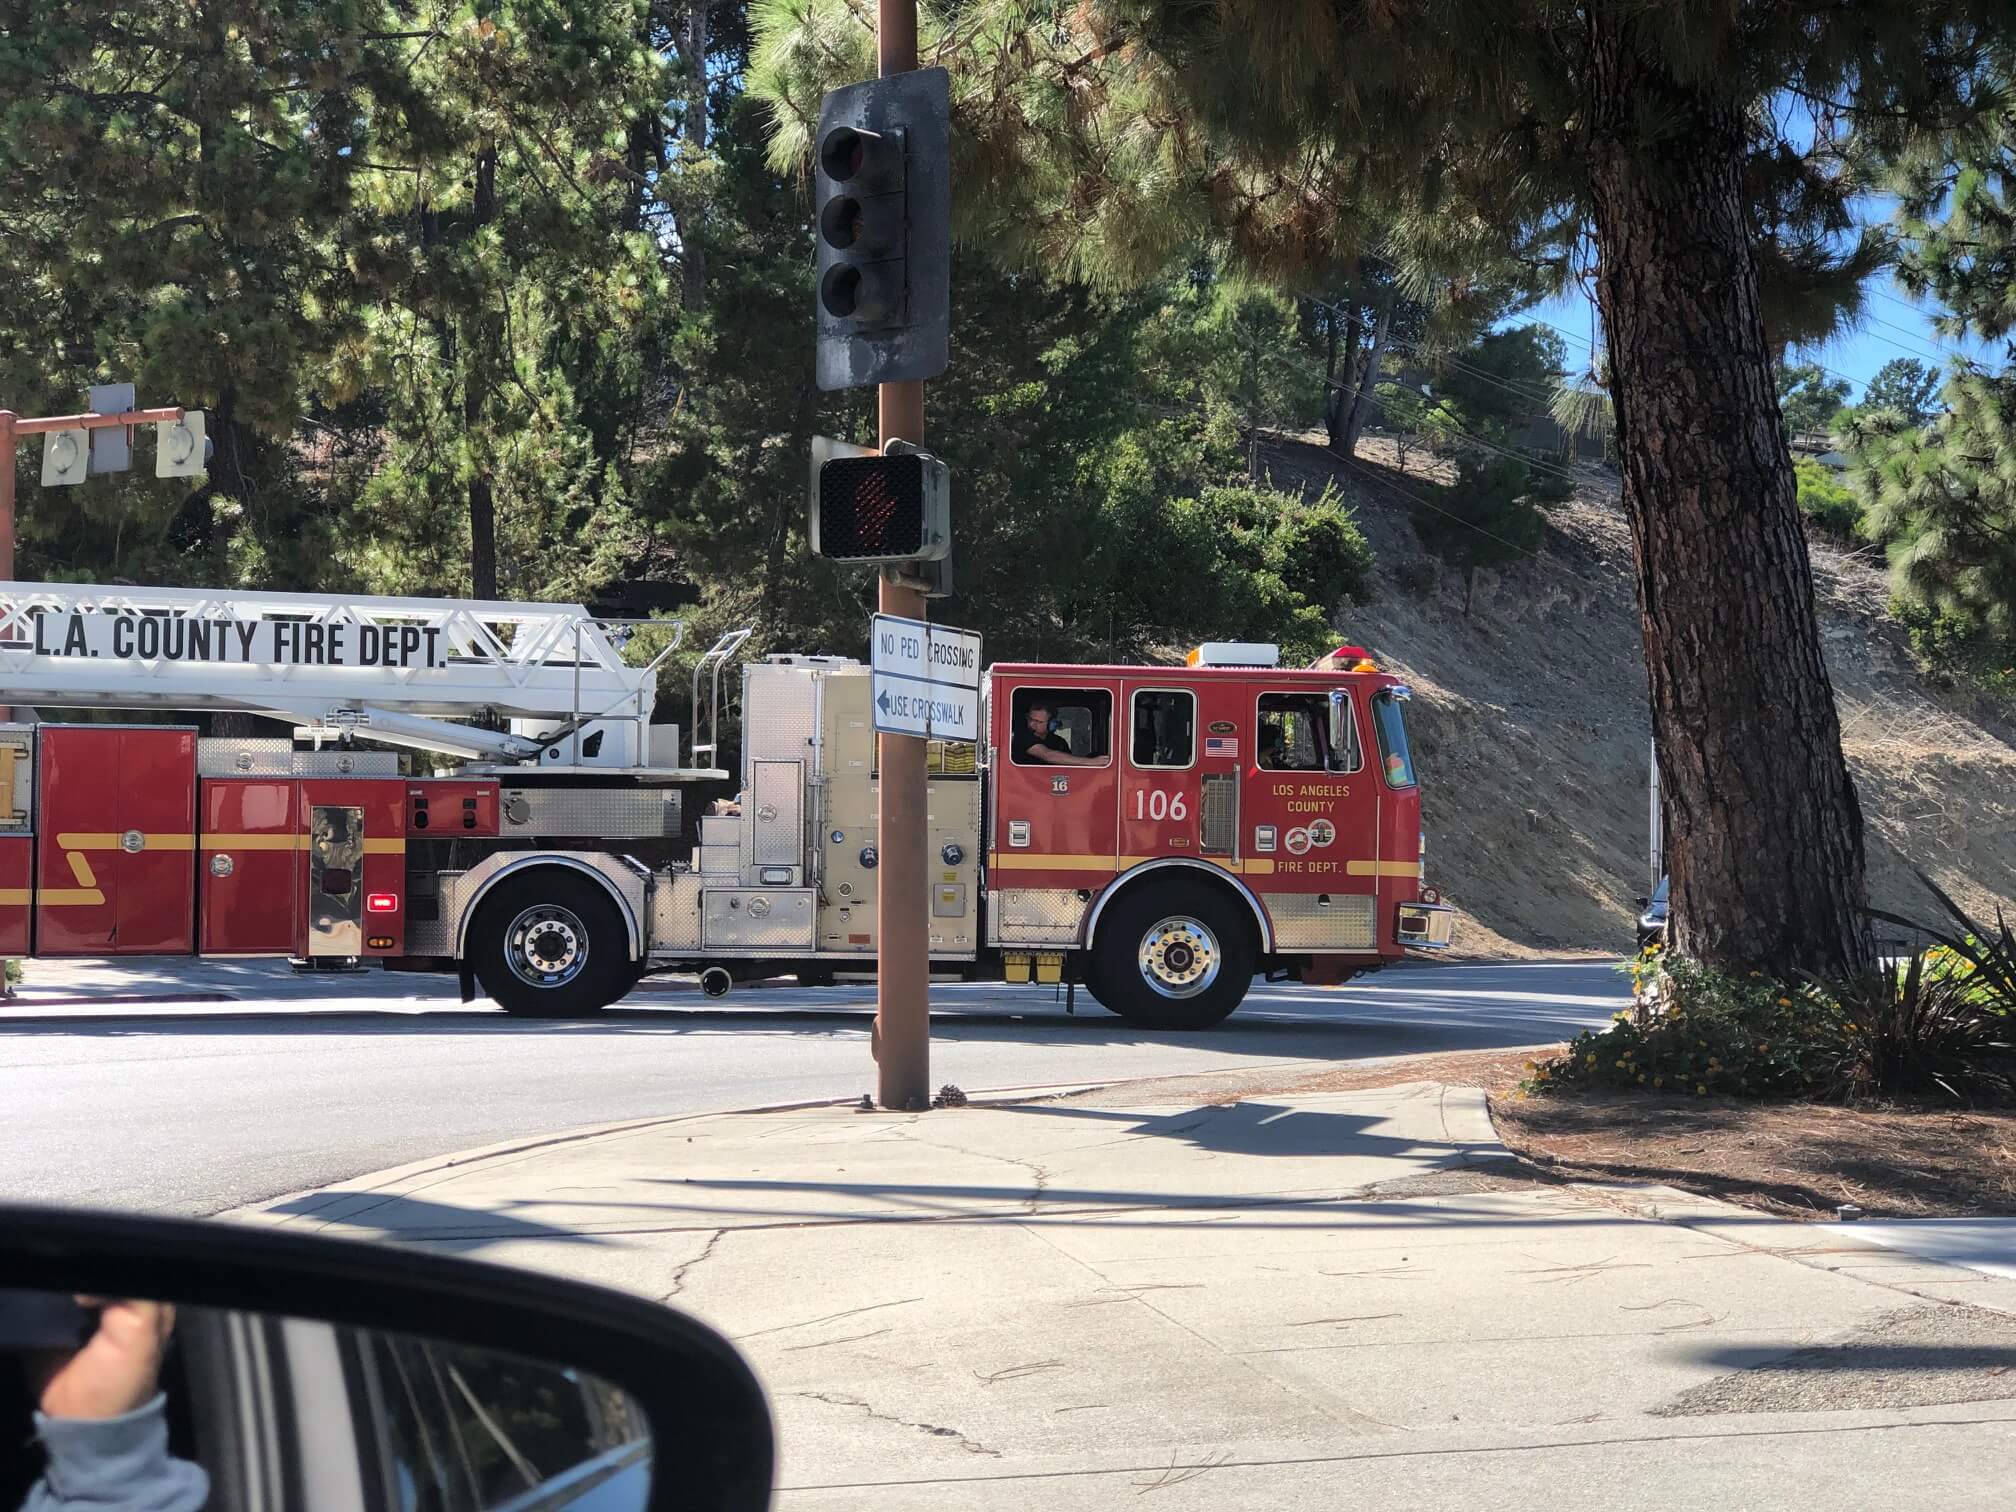 Fire and ladder truck in Rancho Palos Verdes, CA